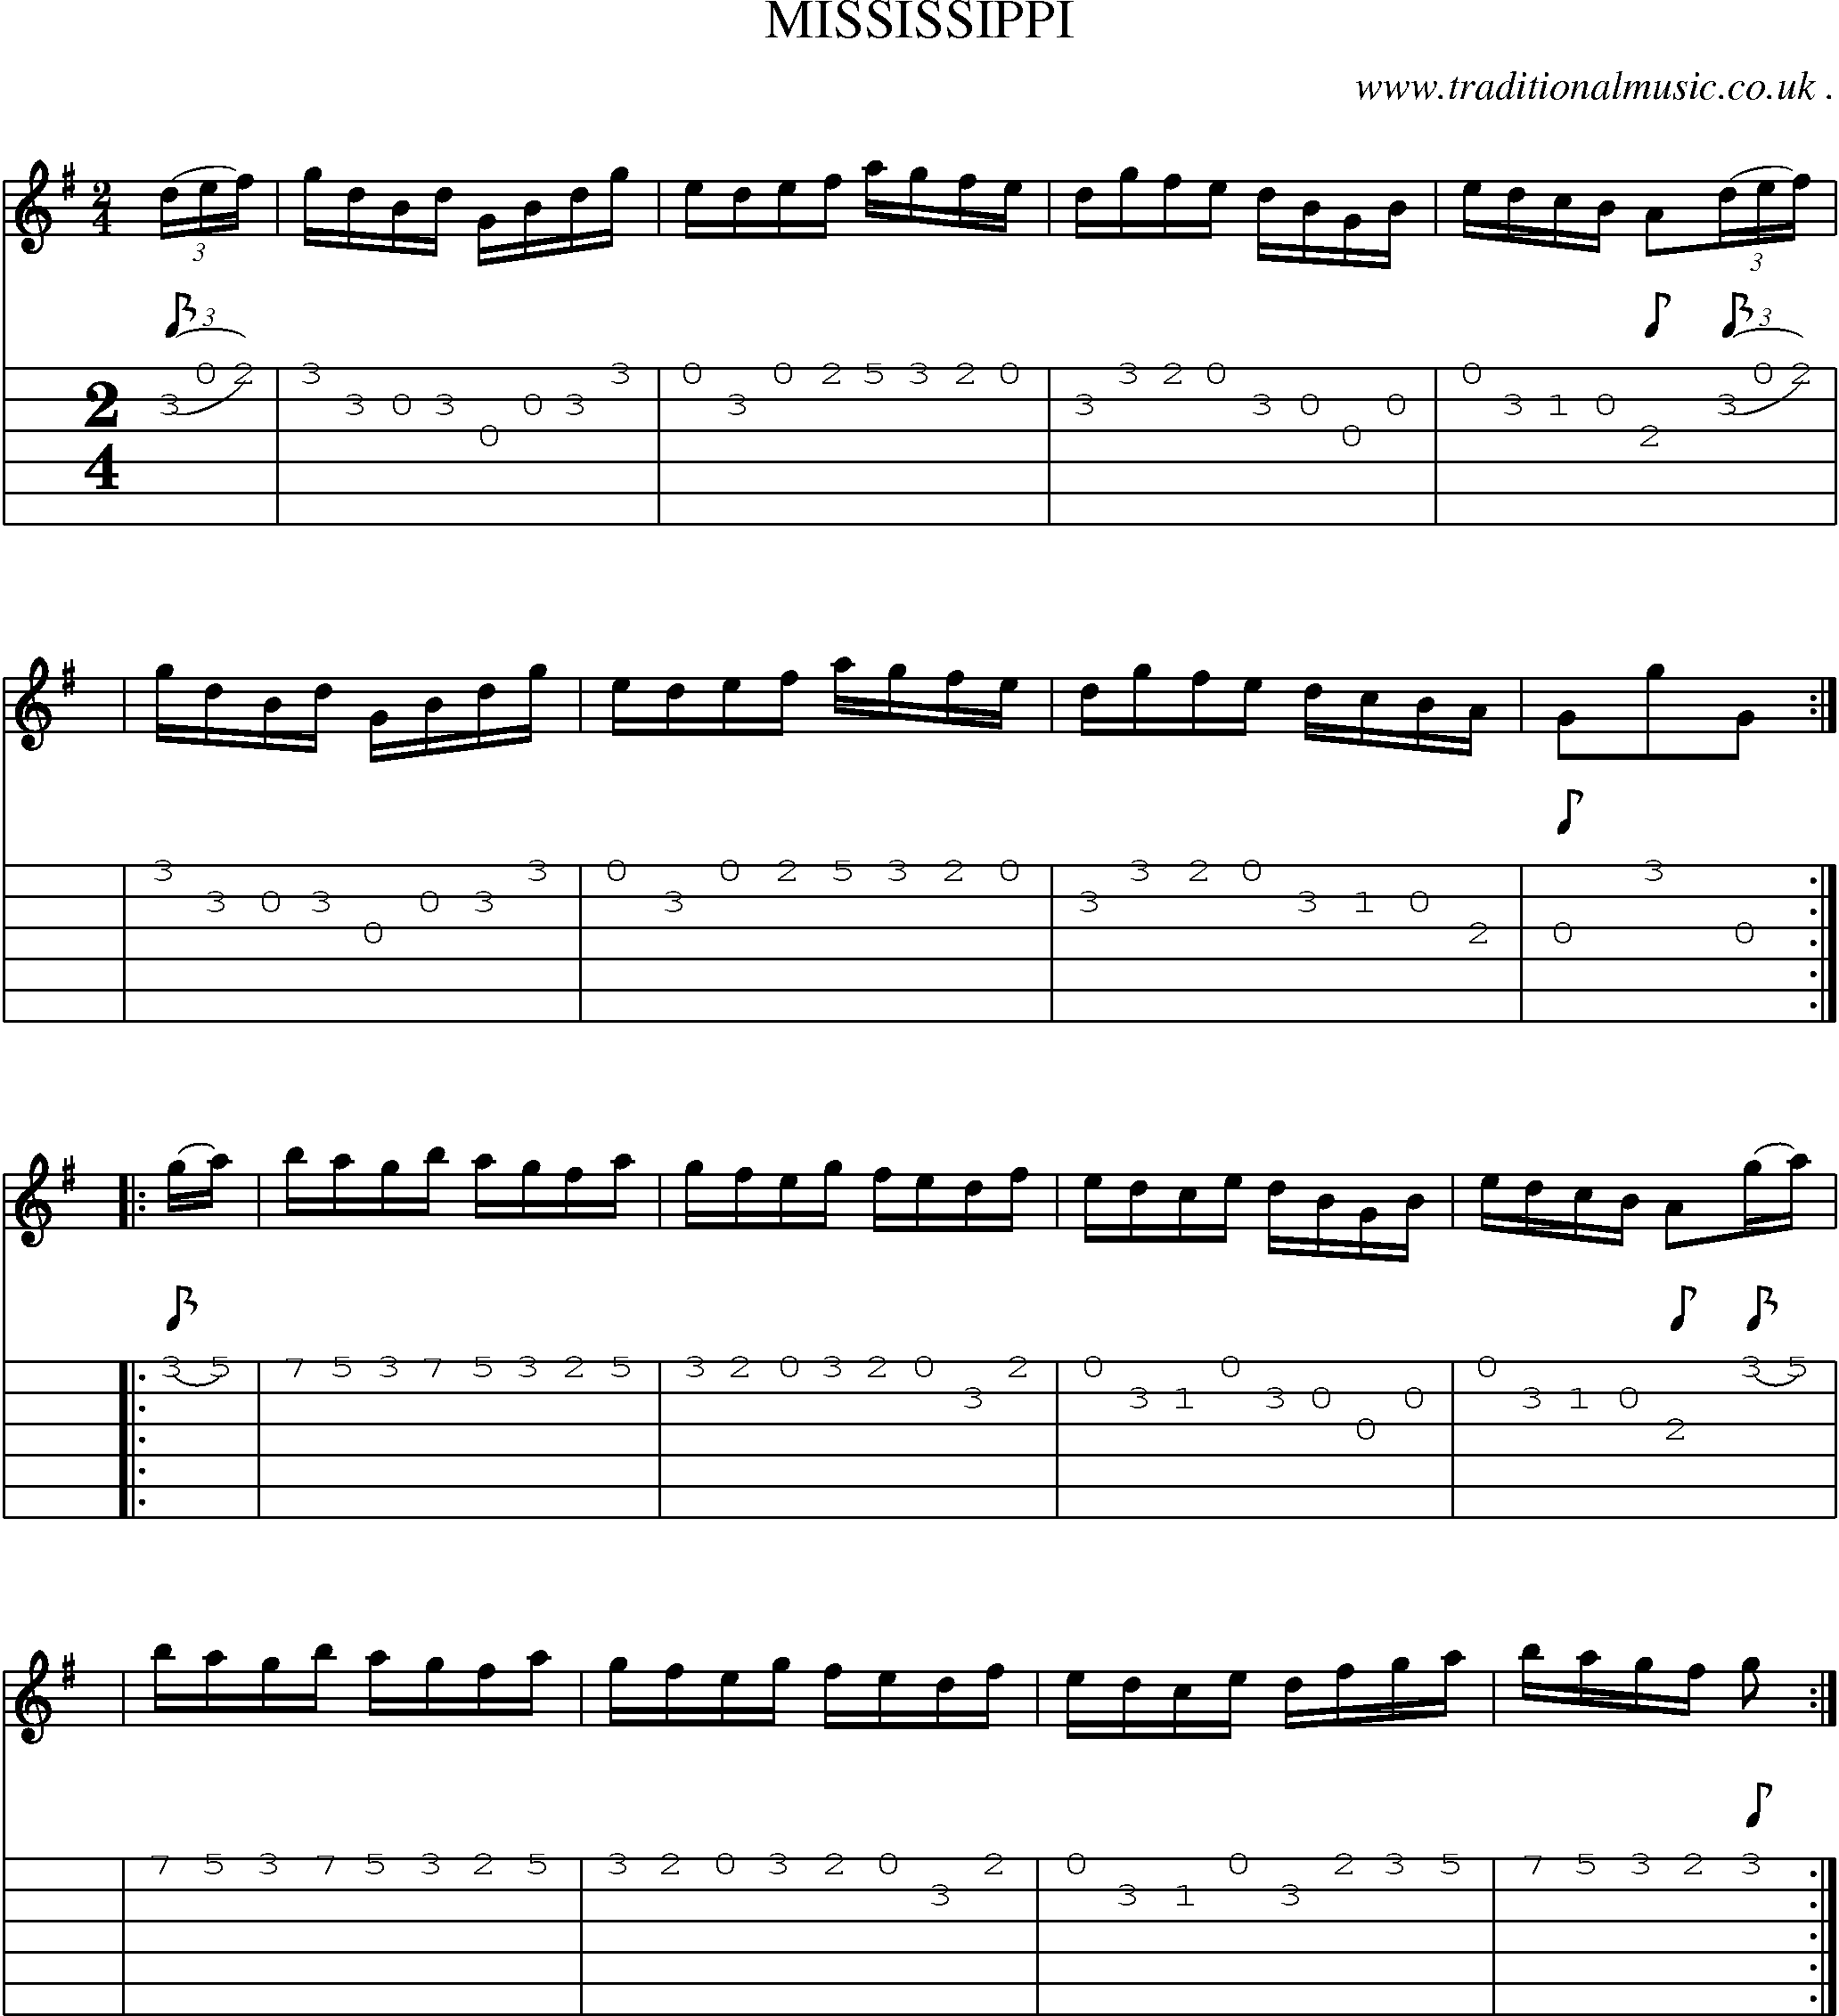 Sheet-Music and Guitar Tabs for Mississippi